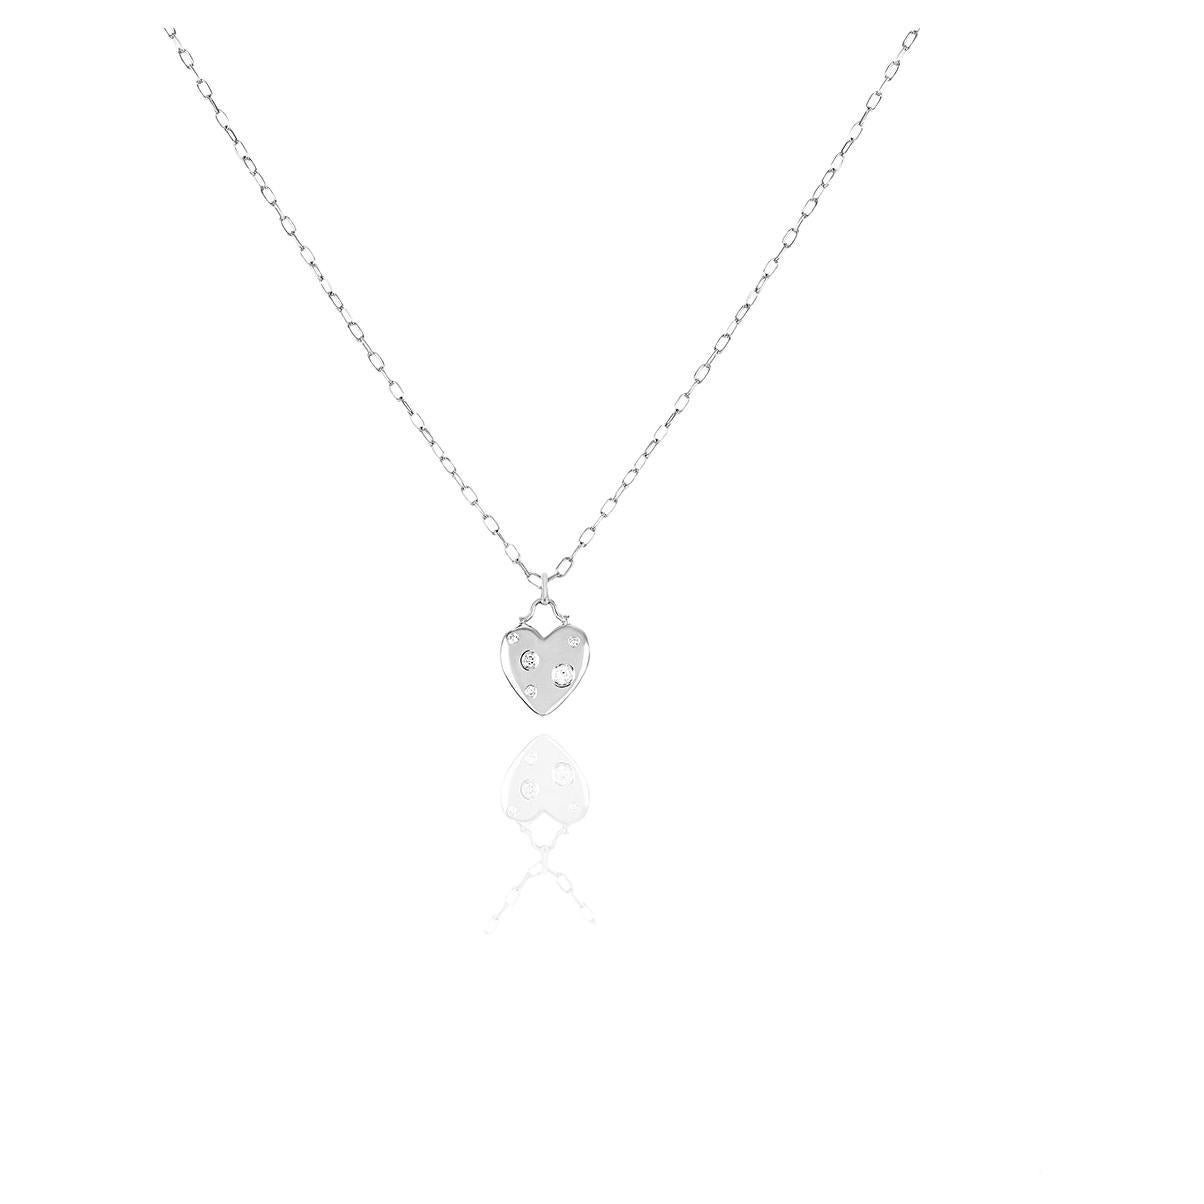 A charming 18k white gold diamond heart pendant by Tiffany & Co. from the Etoile collection. The pendant features a heart motif gypsy set with 5 round brilliant cut diamonds with an approximate weight of 0.10ct, F-G colour and VS clarity. The